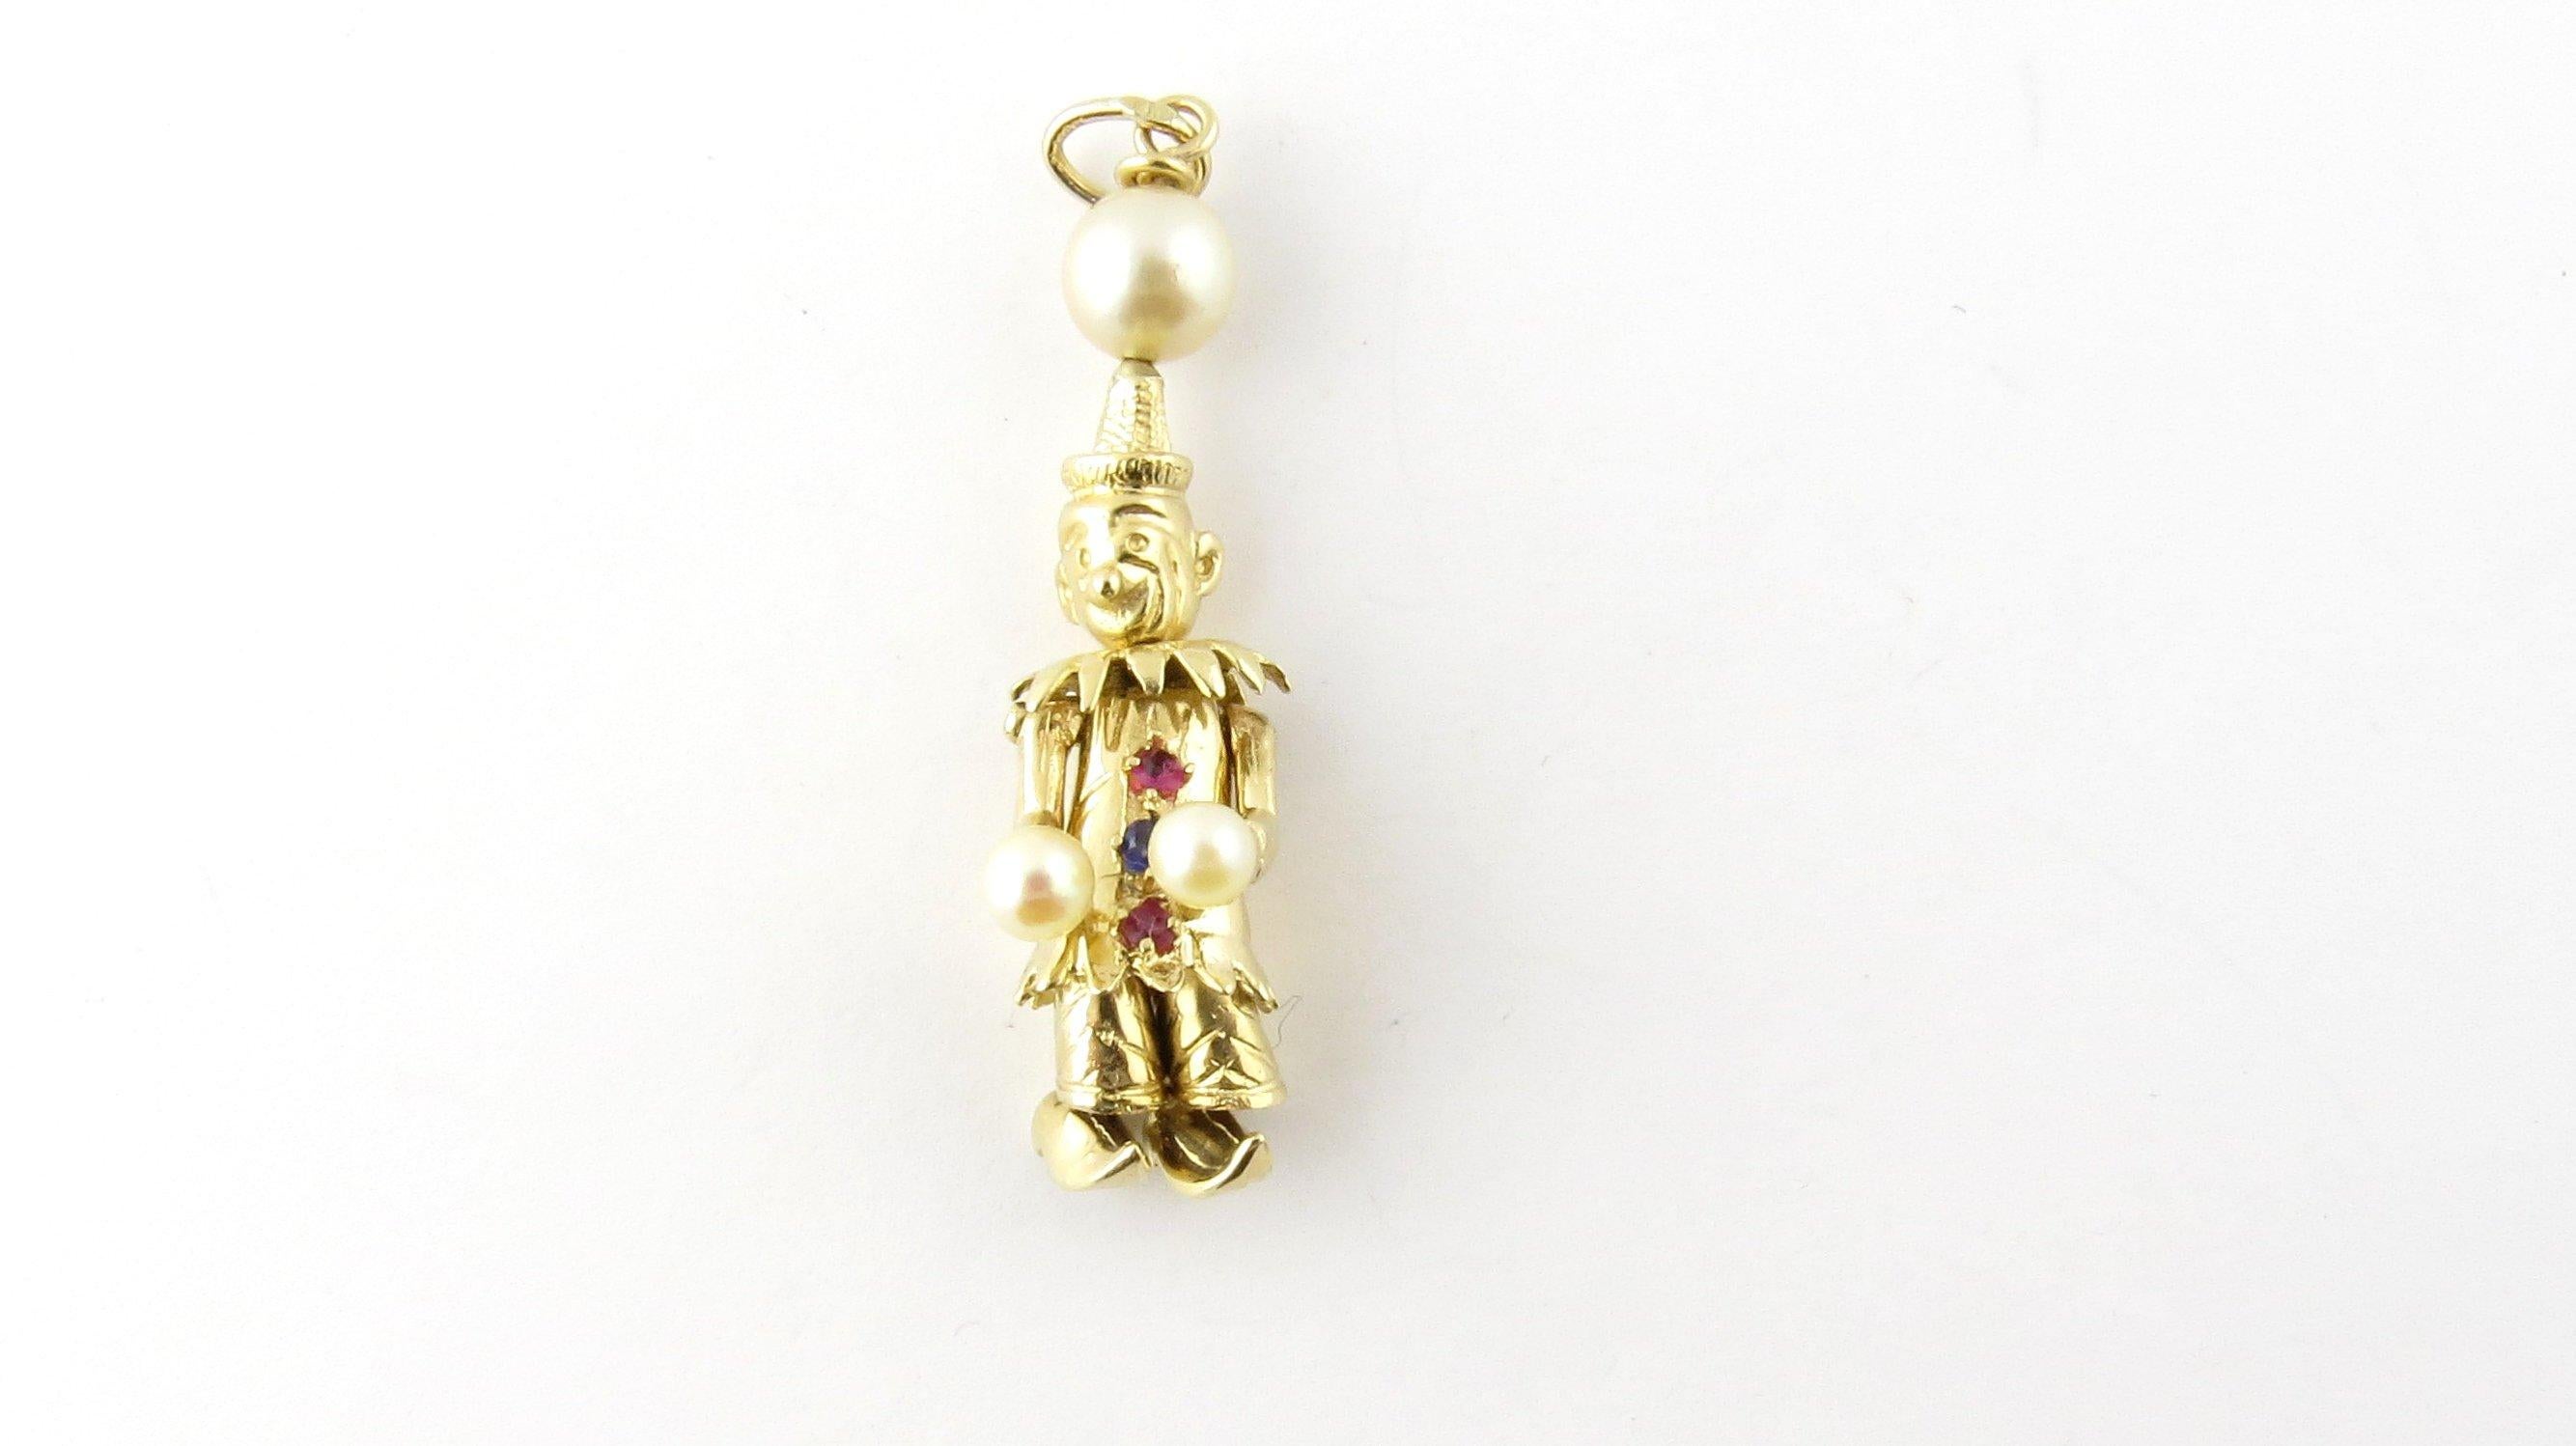 Vintage 14 Karat Yellow Gold Pearl, Ruby and Sapphire Articulated Clown Pendant- 
This stunning pendant features a 3D articulated clown with moving arms, head and legs. Accented with two 4 mm pearls, one 7 mm pearl, two rubies and one sapphire.